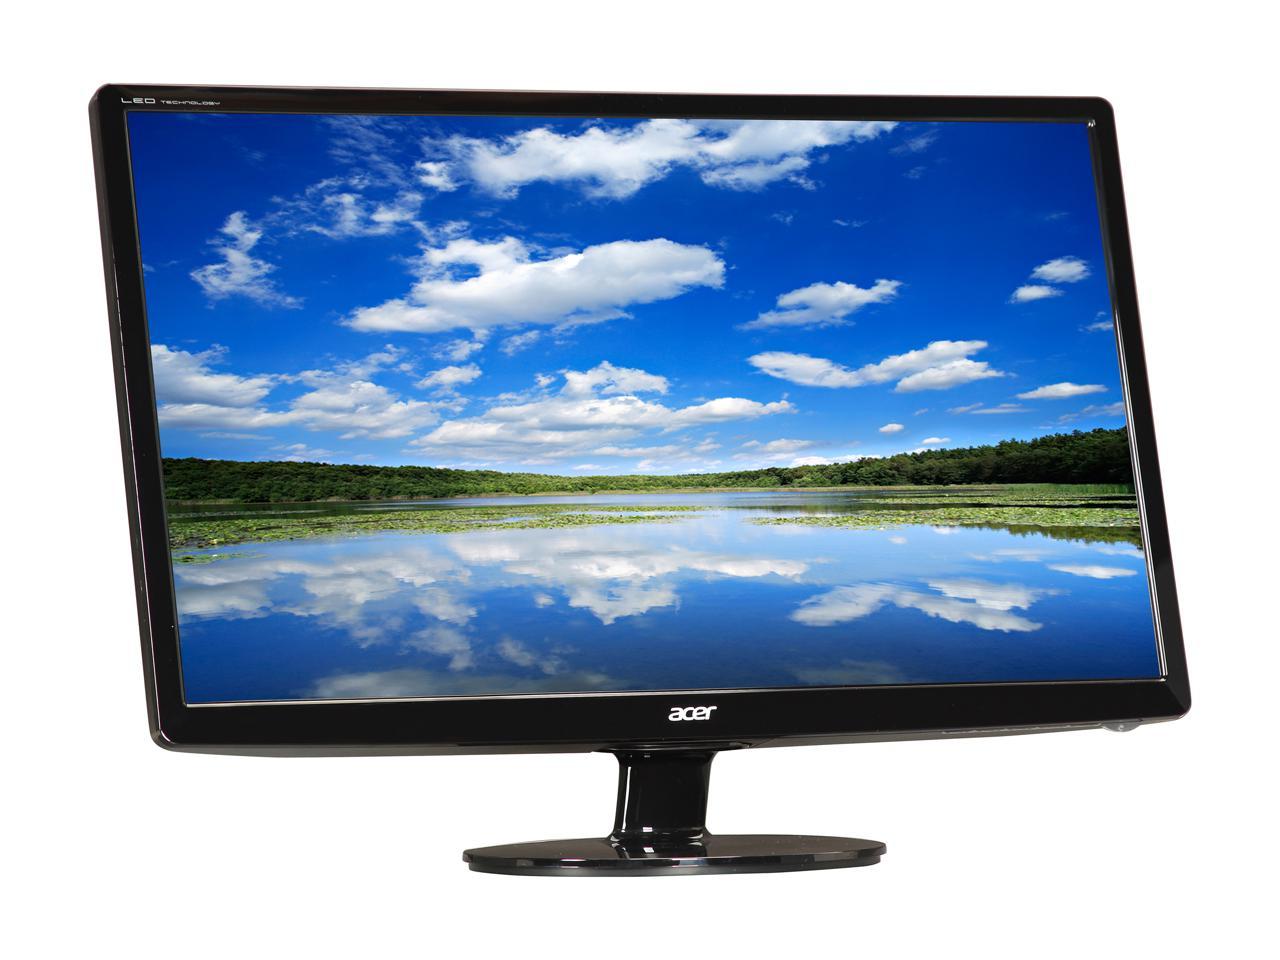 Acer S241HL bmid UM.FS1AA.001 24" Full HD 1920 x 1080 5ms 60 Hz D-Sub, DVI, HDMI Built-in Speakers LCD Monitor